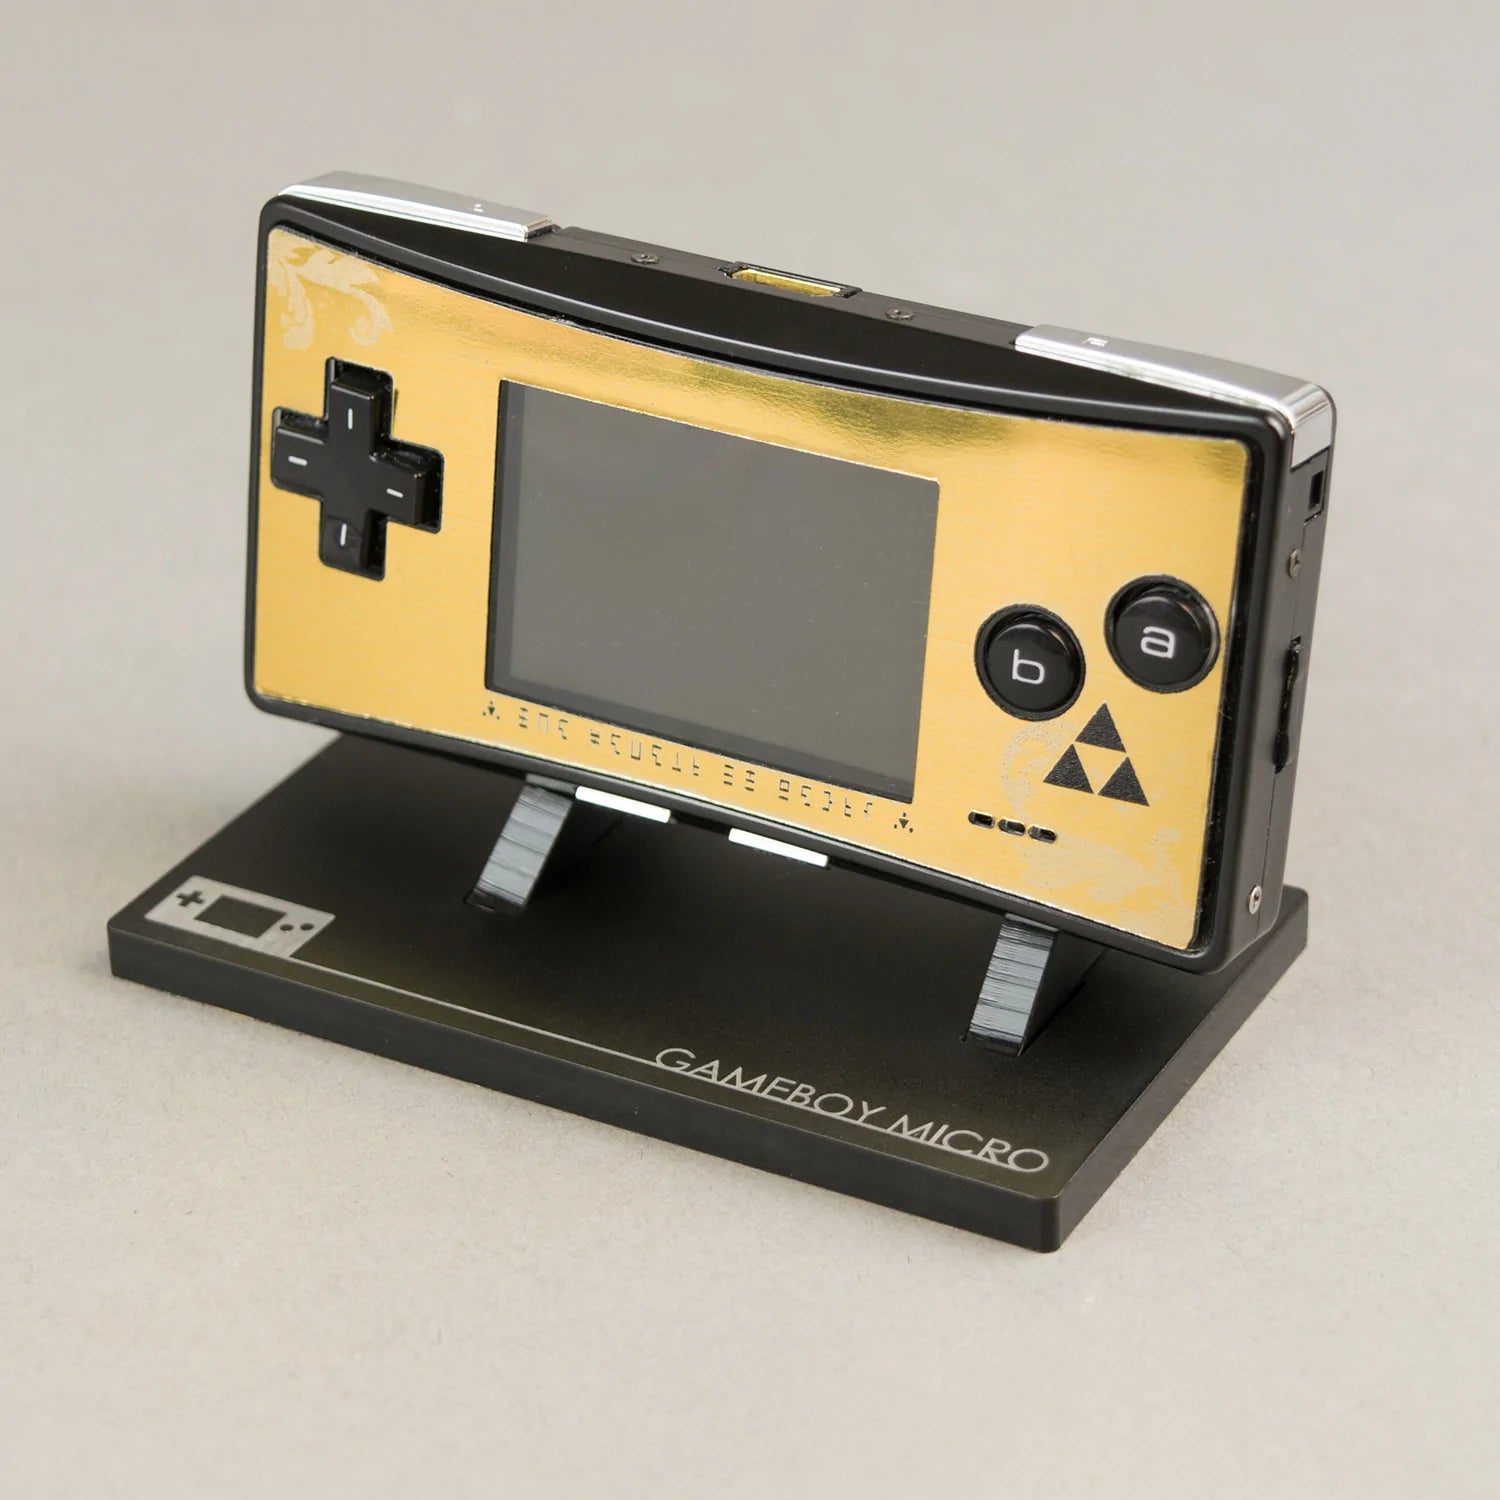 Why the Gameboy Micro was a Total Failure!